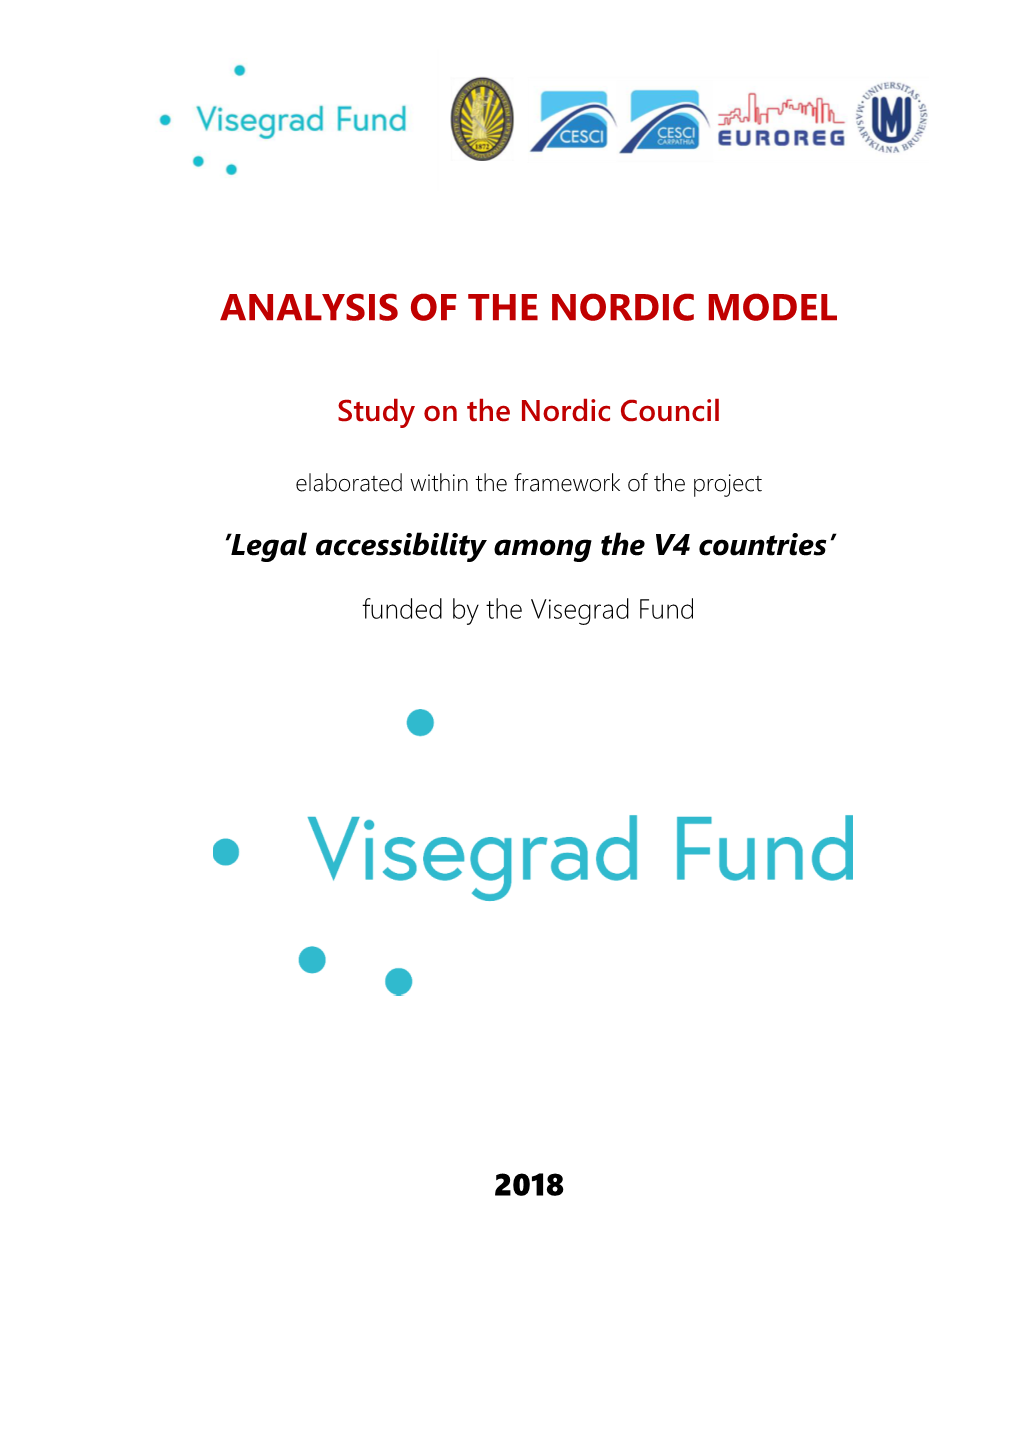 Analysis of the Nordic Model